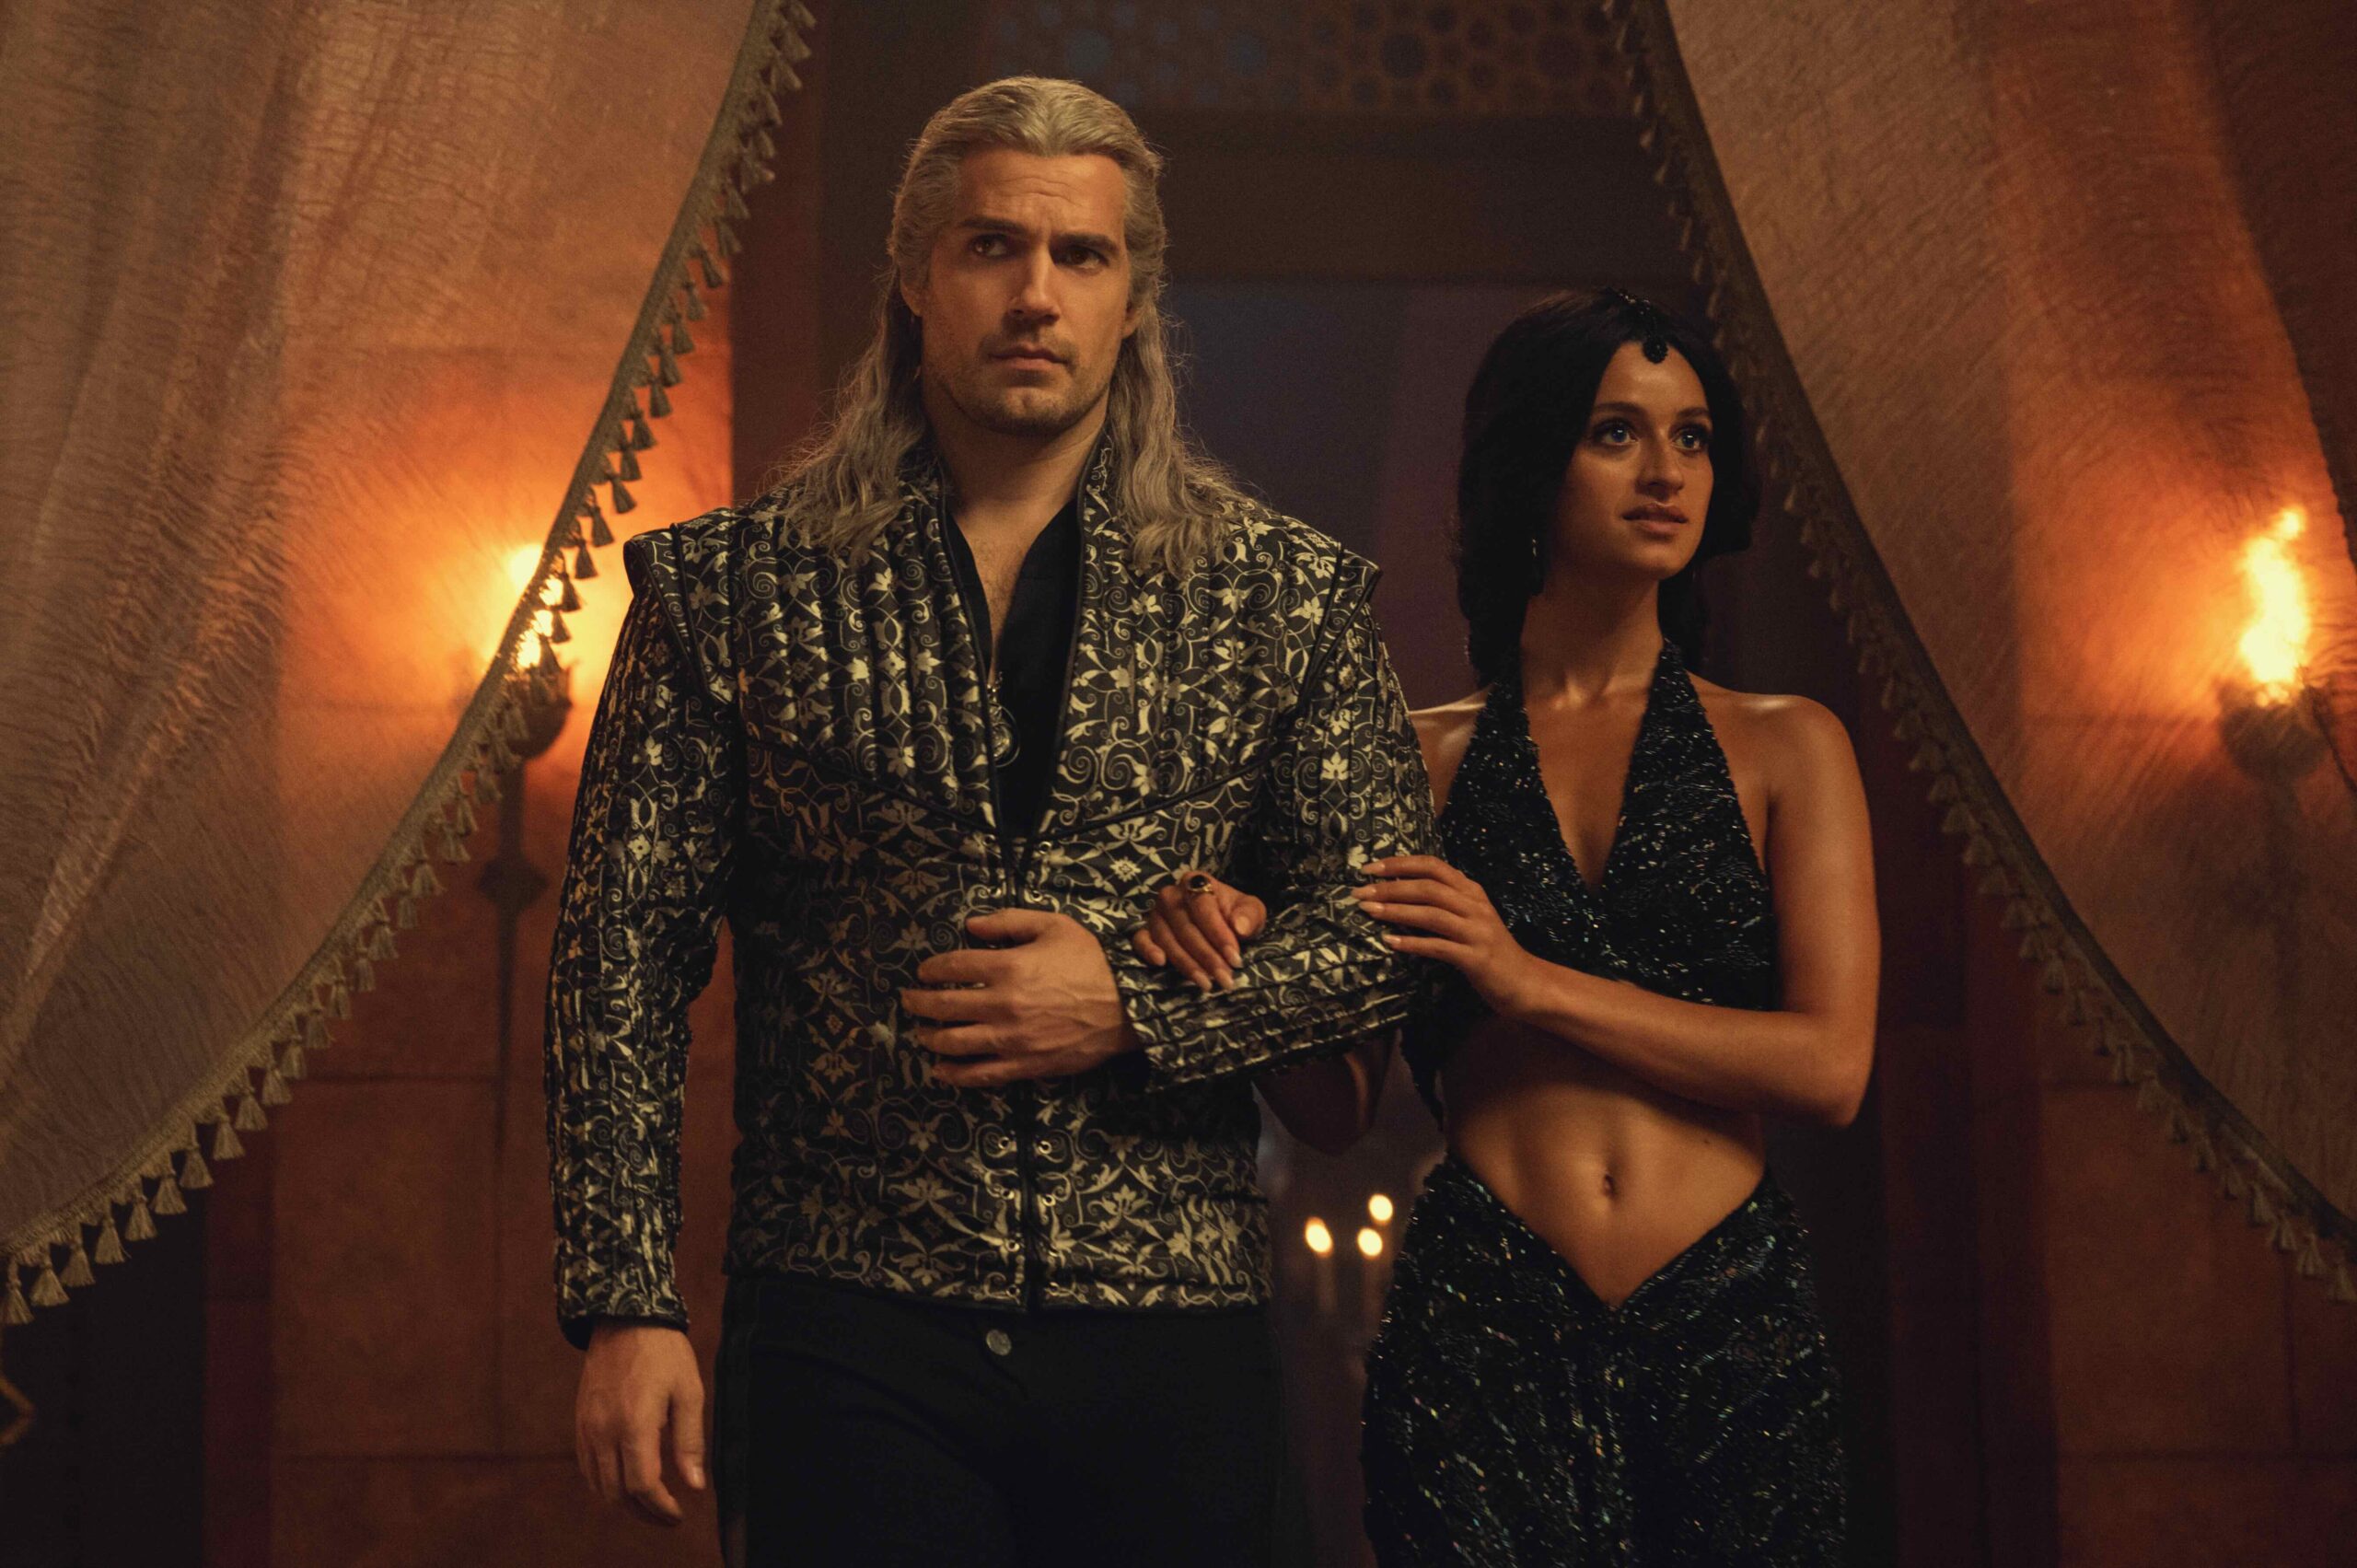 Henry Cavill as Geralt and Anya Chalotra as Yennefer in The Witcher season 3